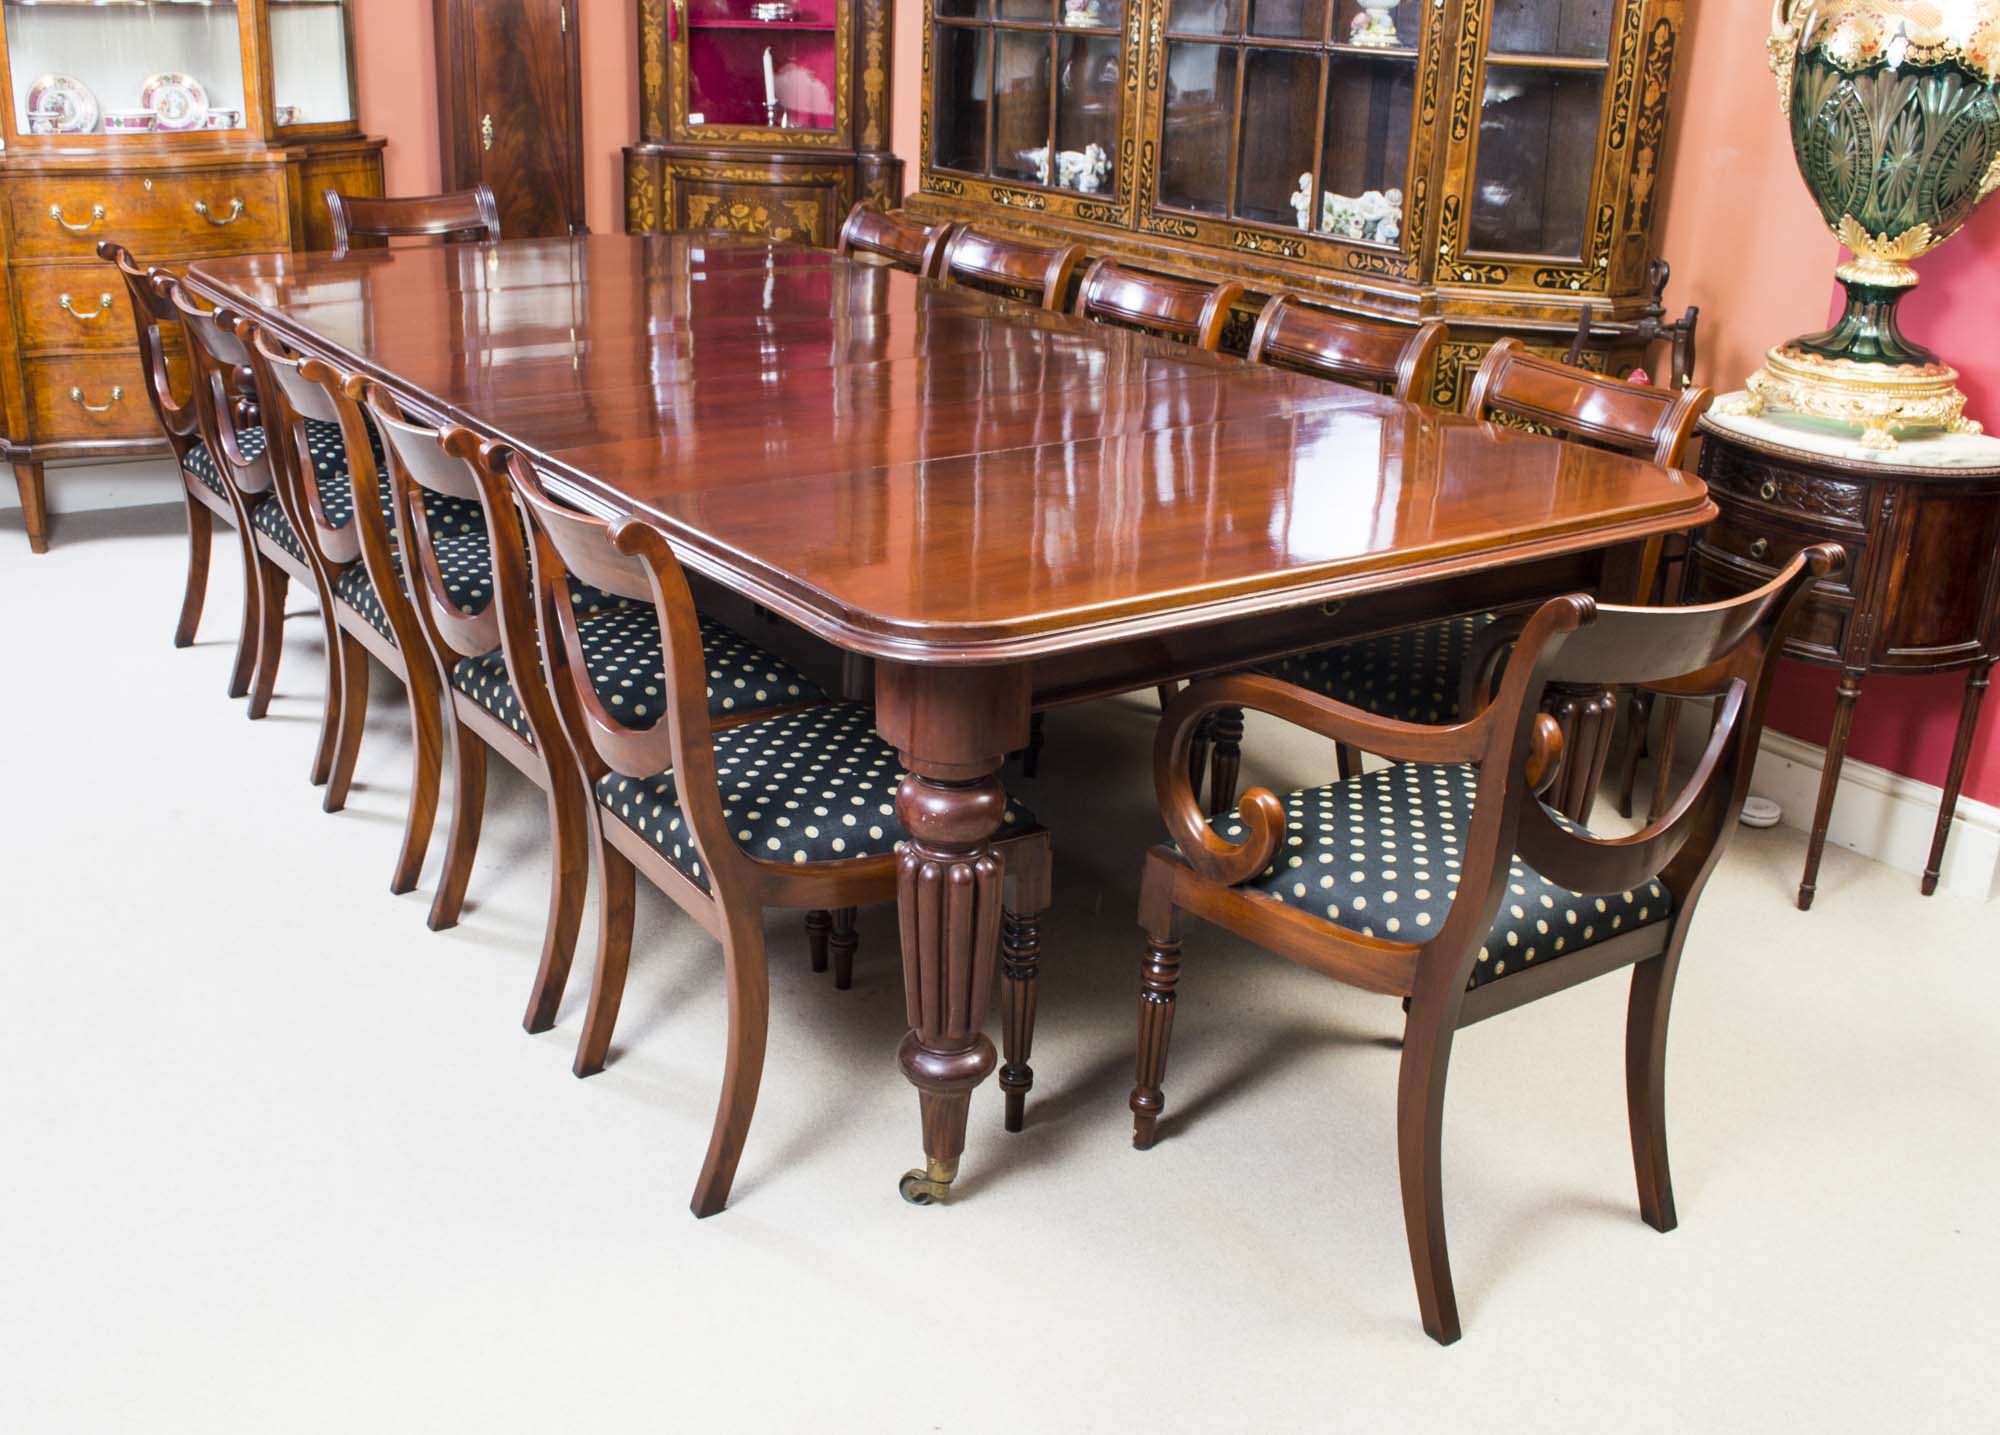 century furniture chancery court dining room table chairs